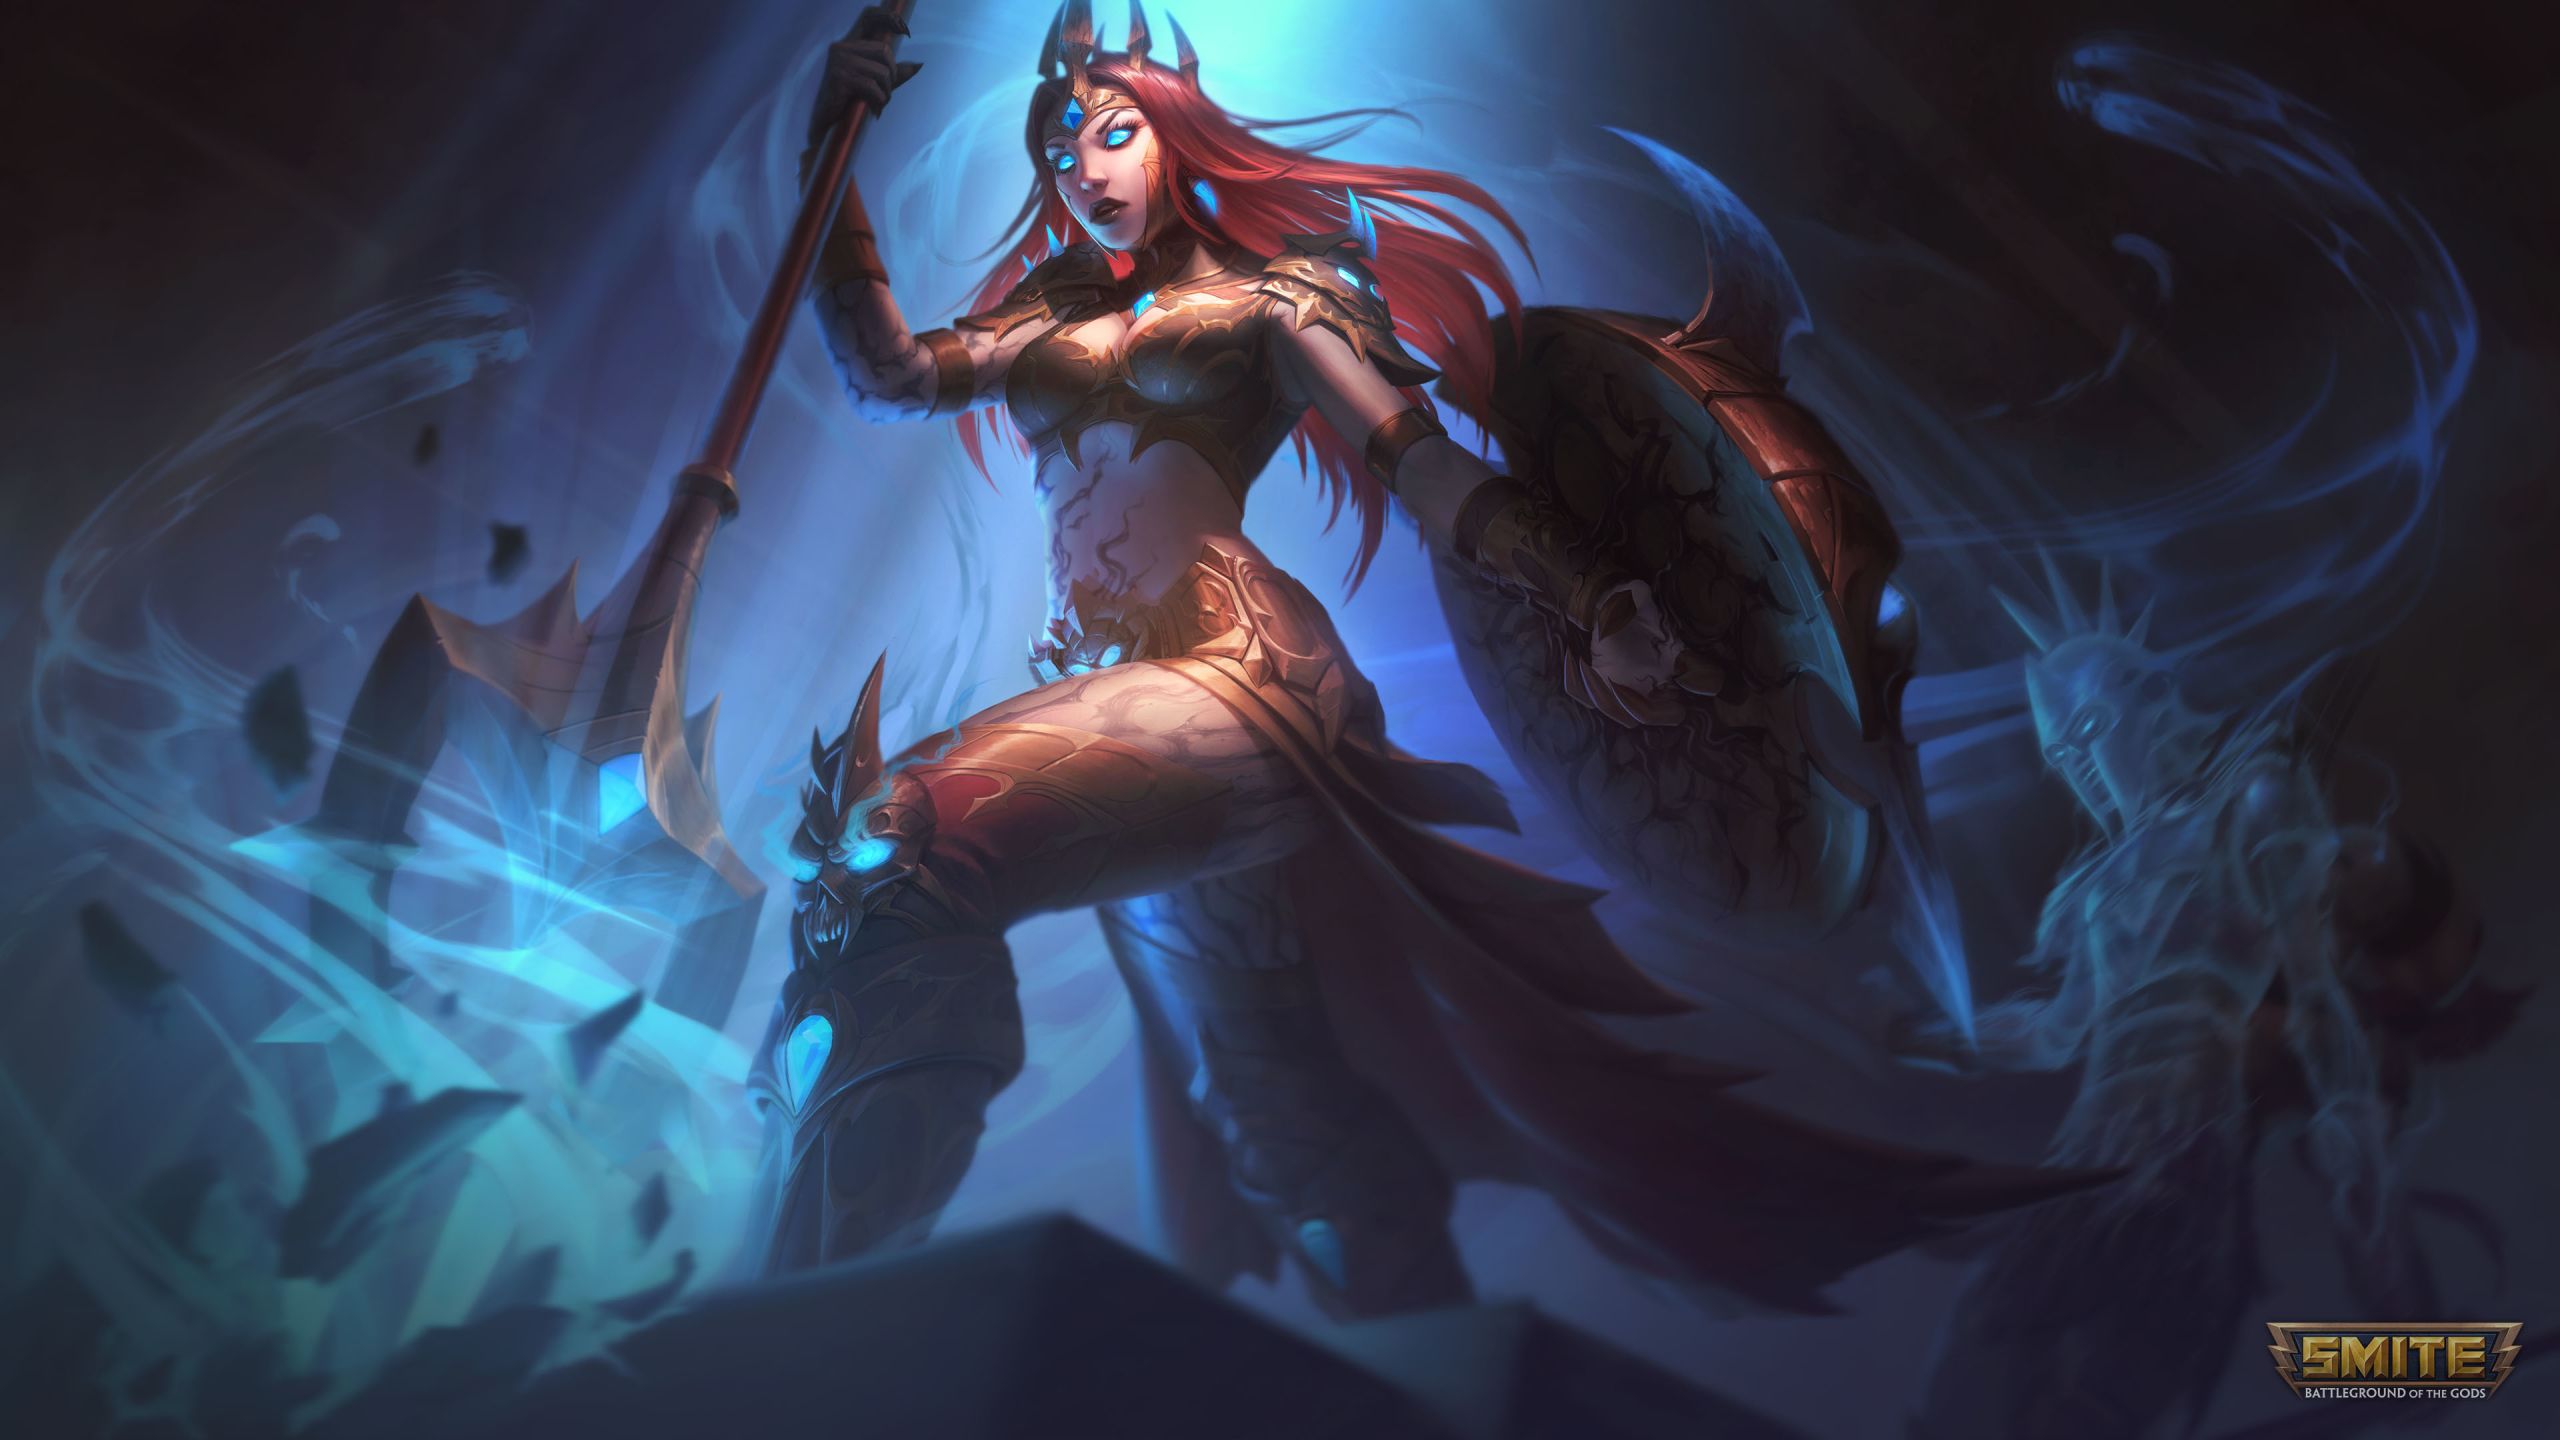 Athena x Smite 1440P Resolution Wallpaper, HD Games 4K Wallpaper, Image, Photo and Background